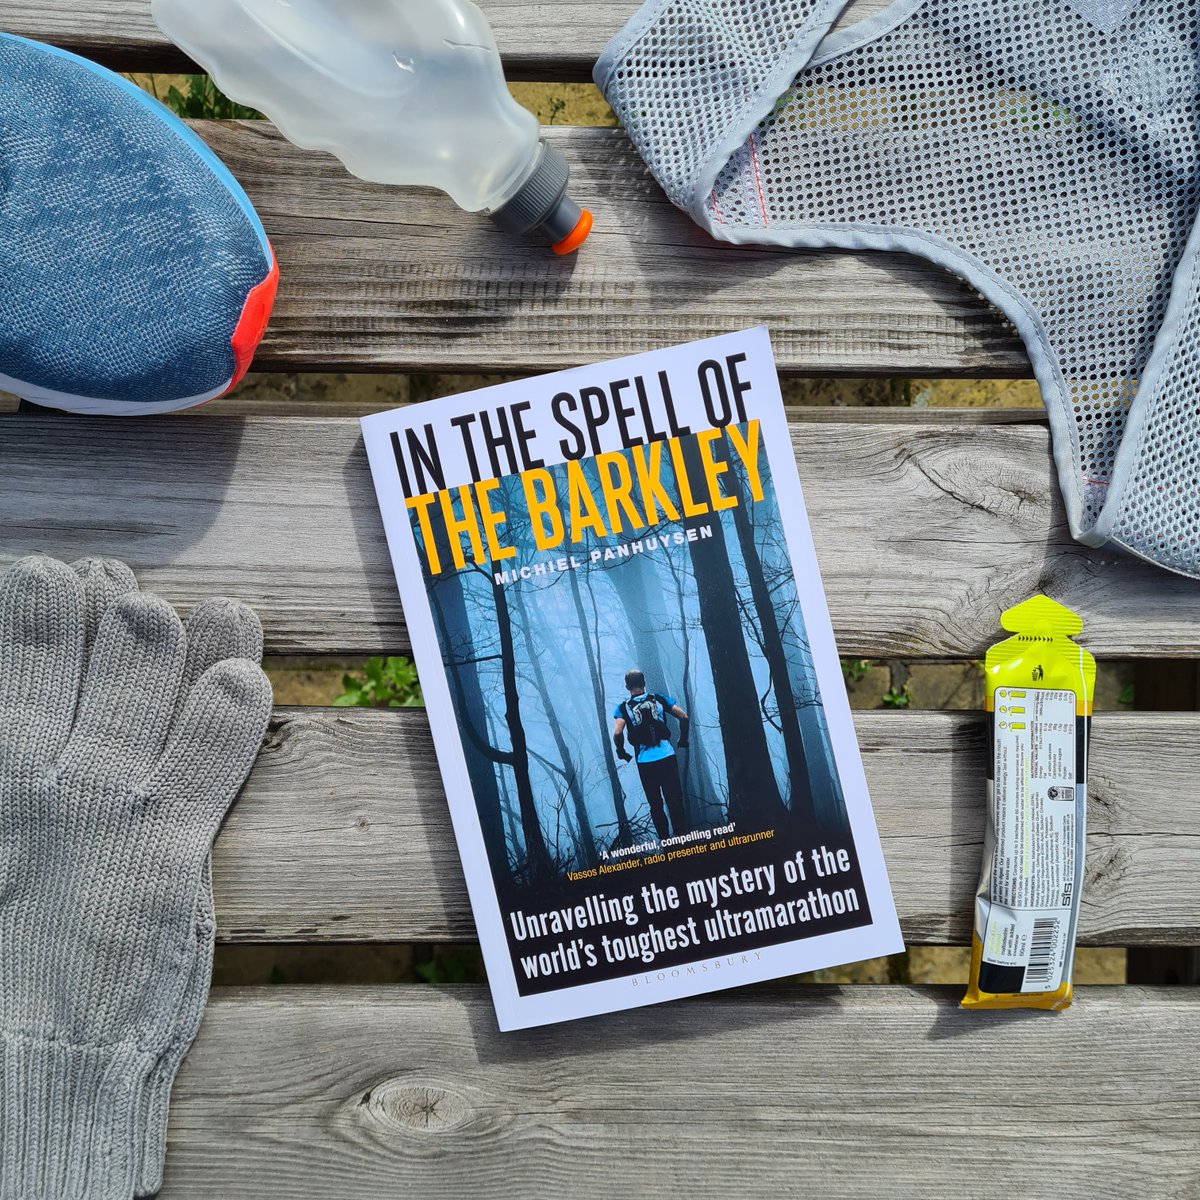 RT this, and follow @BloomsburySport to be in the Sunday 9th April 9pm prize draw for your chance to copy of In The Spell of the Barkley, by Michiel Panhuysen. We will choose six winners. Good luck! Find out more about the book here: bit.ly/3SvYK7y #ad #ukrunchat